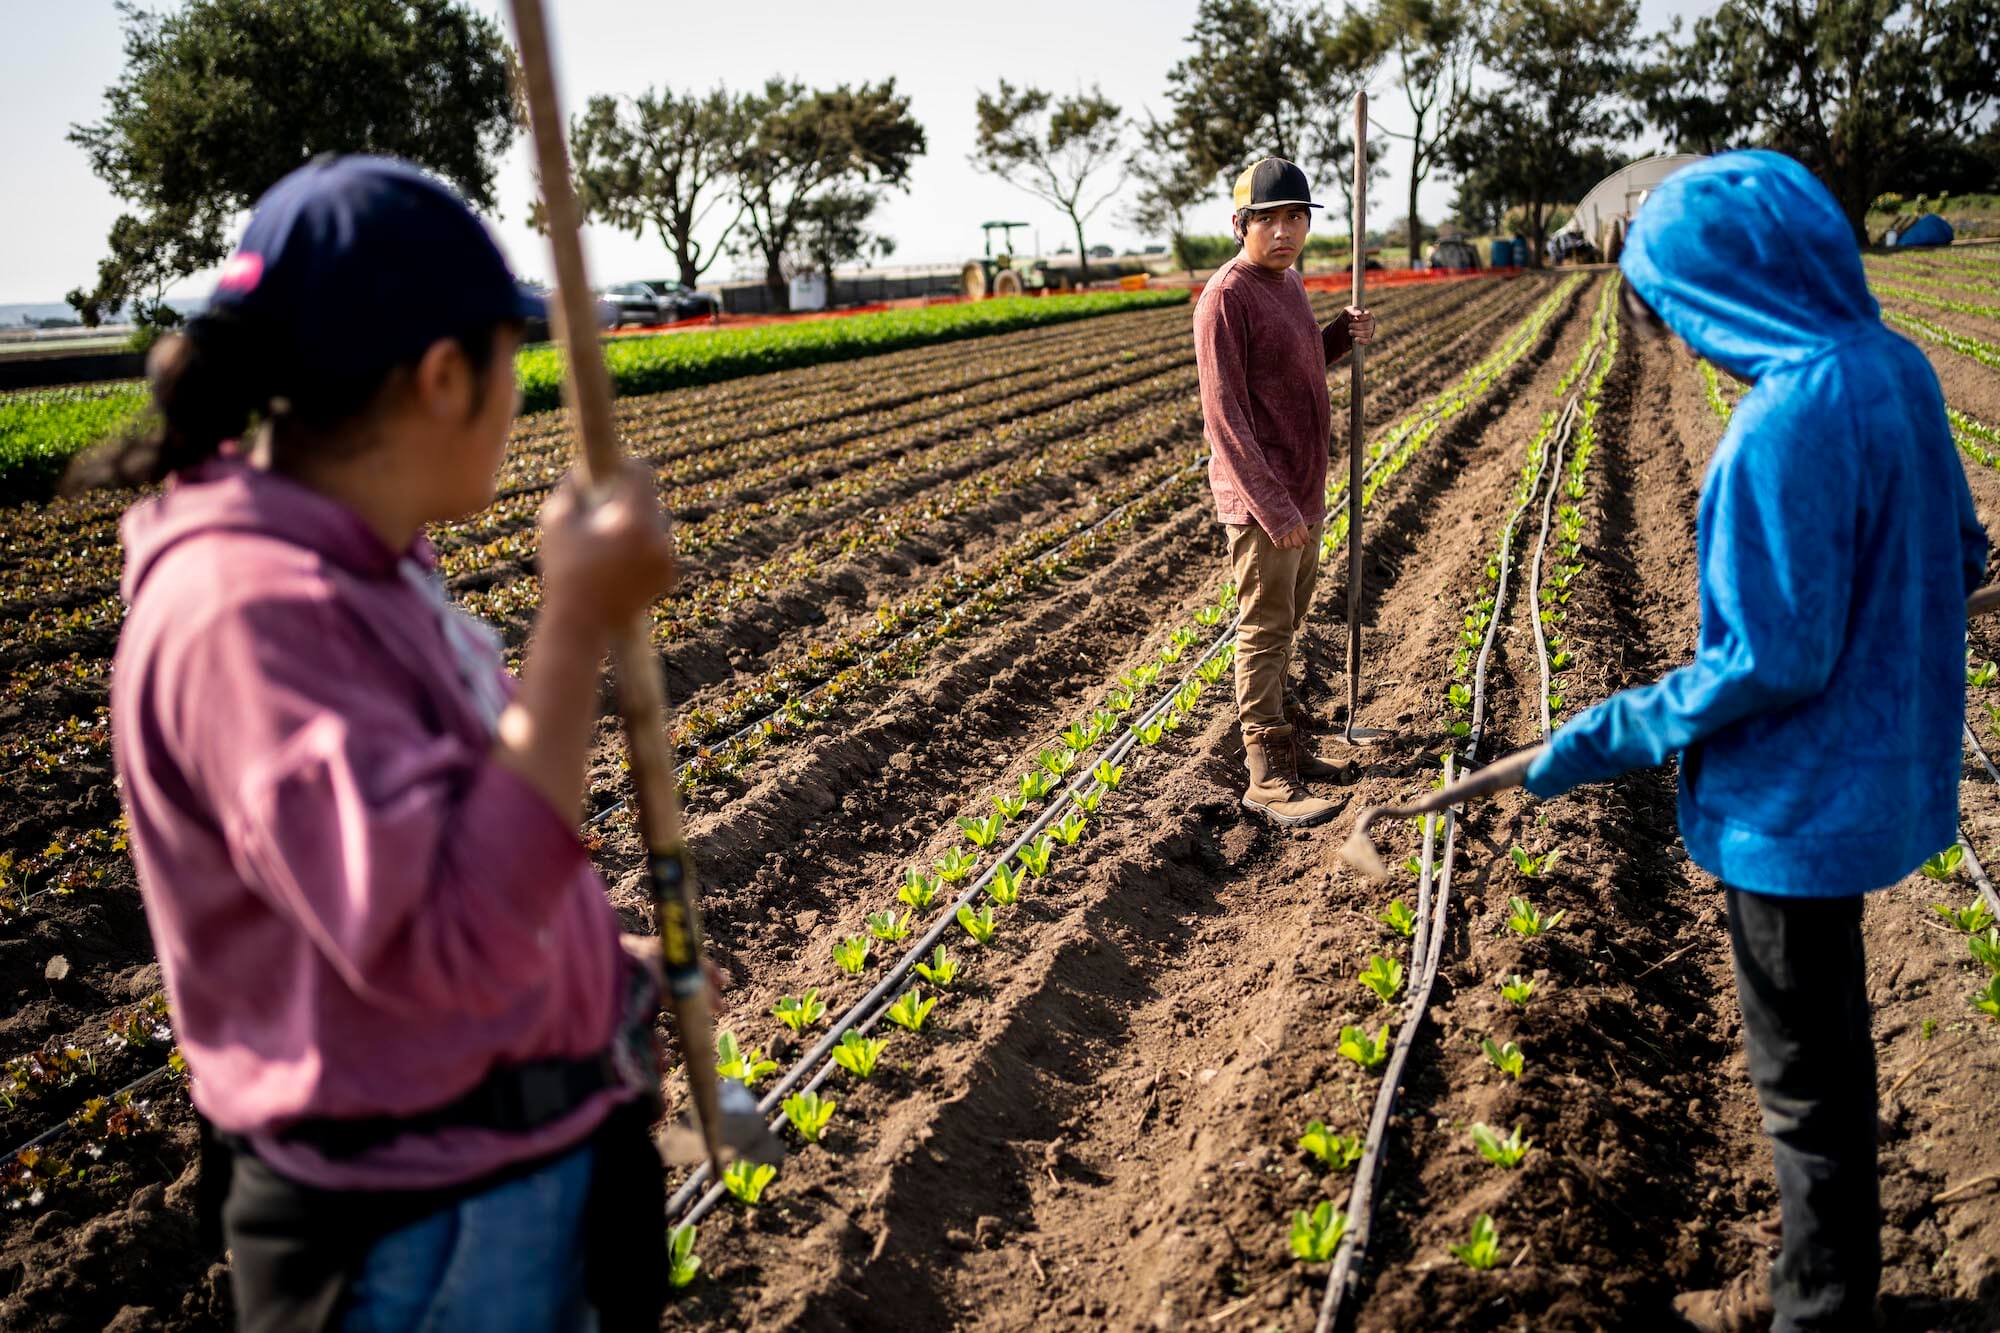 Transitioning from being a field worker to now farming her own land, organic farmer Celsa Ortega tells her sons what to do, and how to do it, as they all weed one of her fields of celery on September 20, 2020 in Salinas, California. May 2021